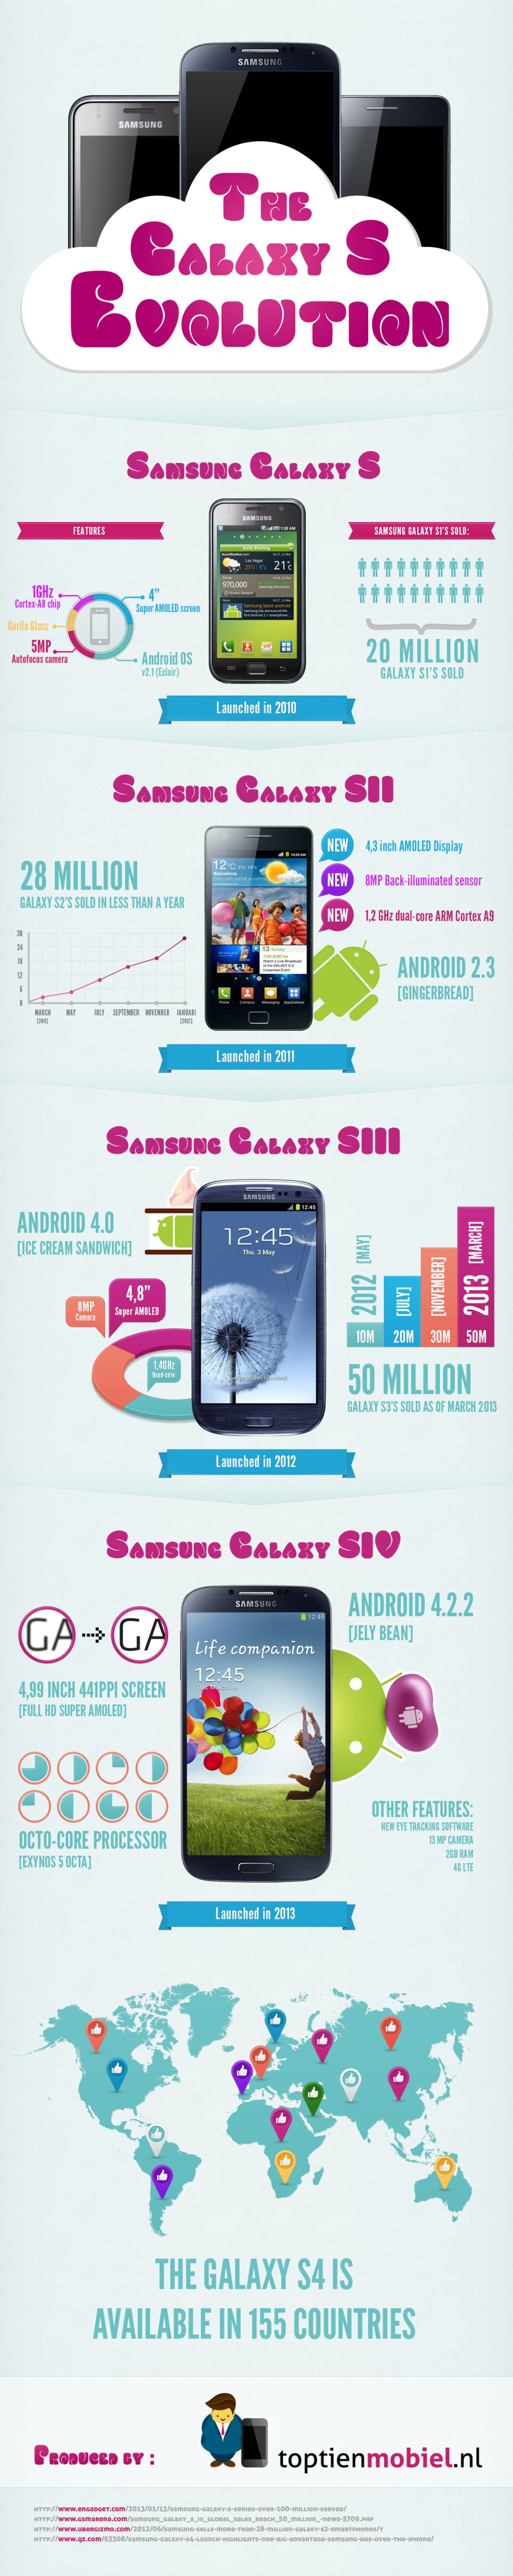 The Evolution of Samsung's Galaxies